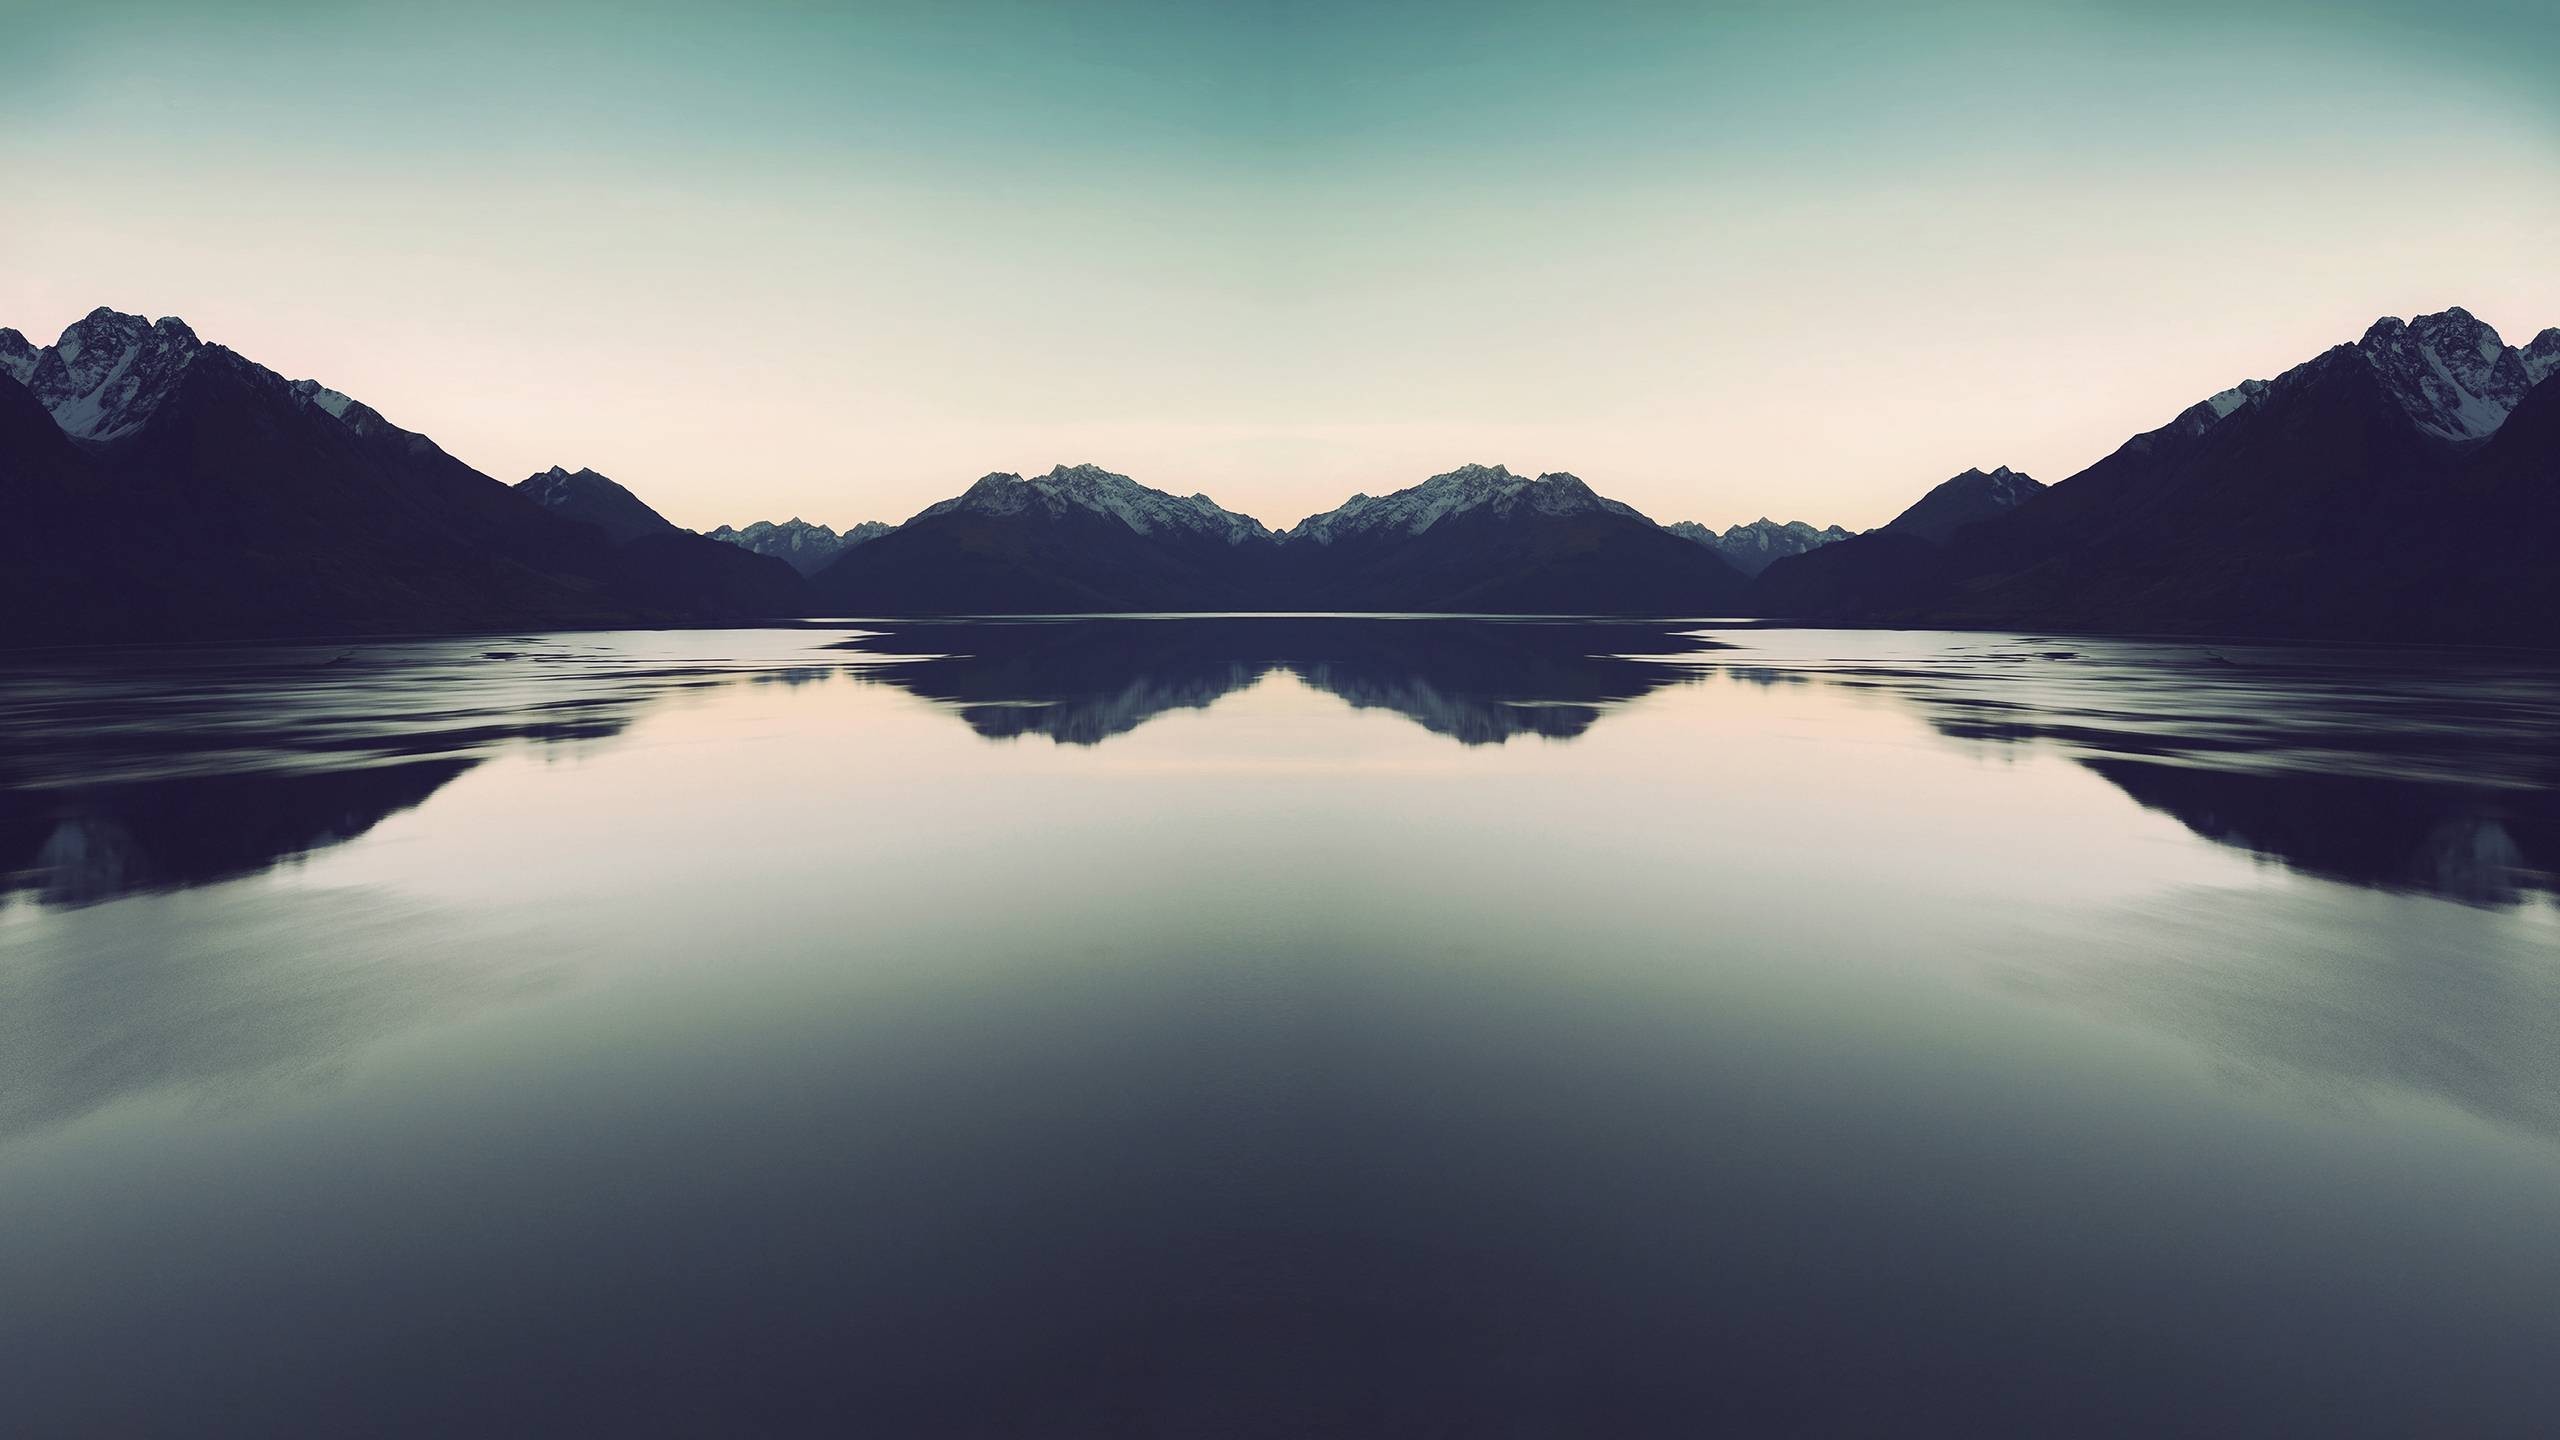 General 2560x1440 photography water landscape nature lake reflection mountains low light